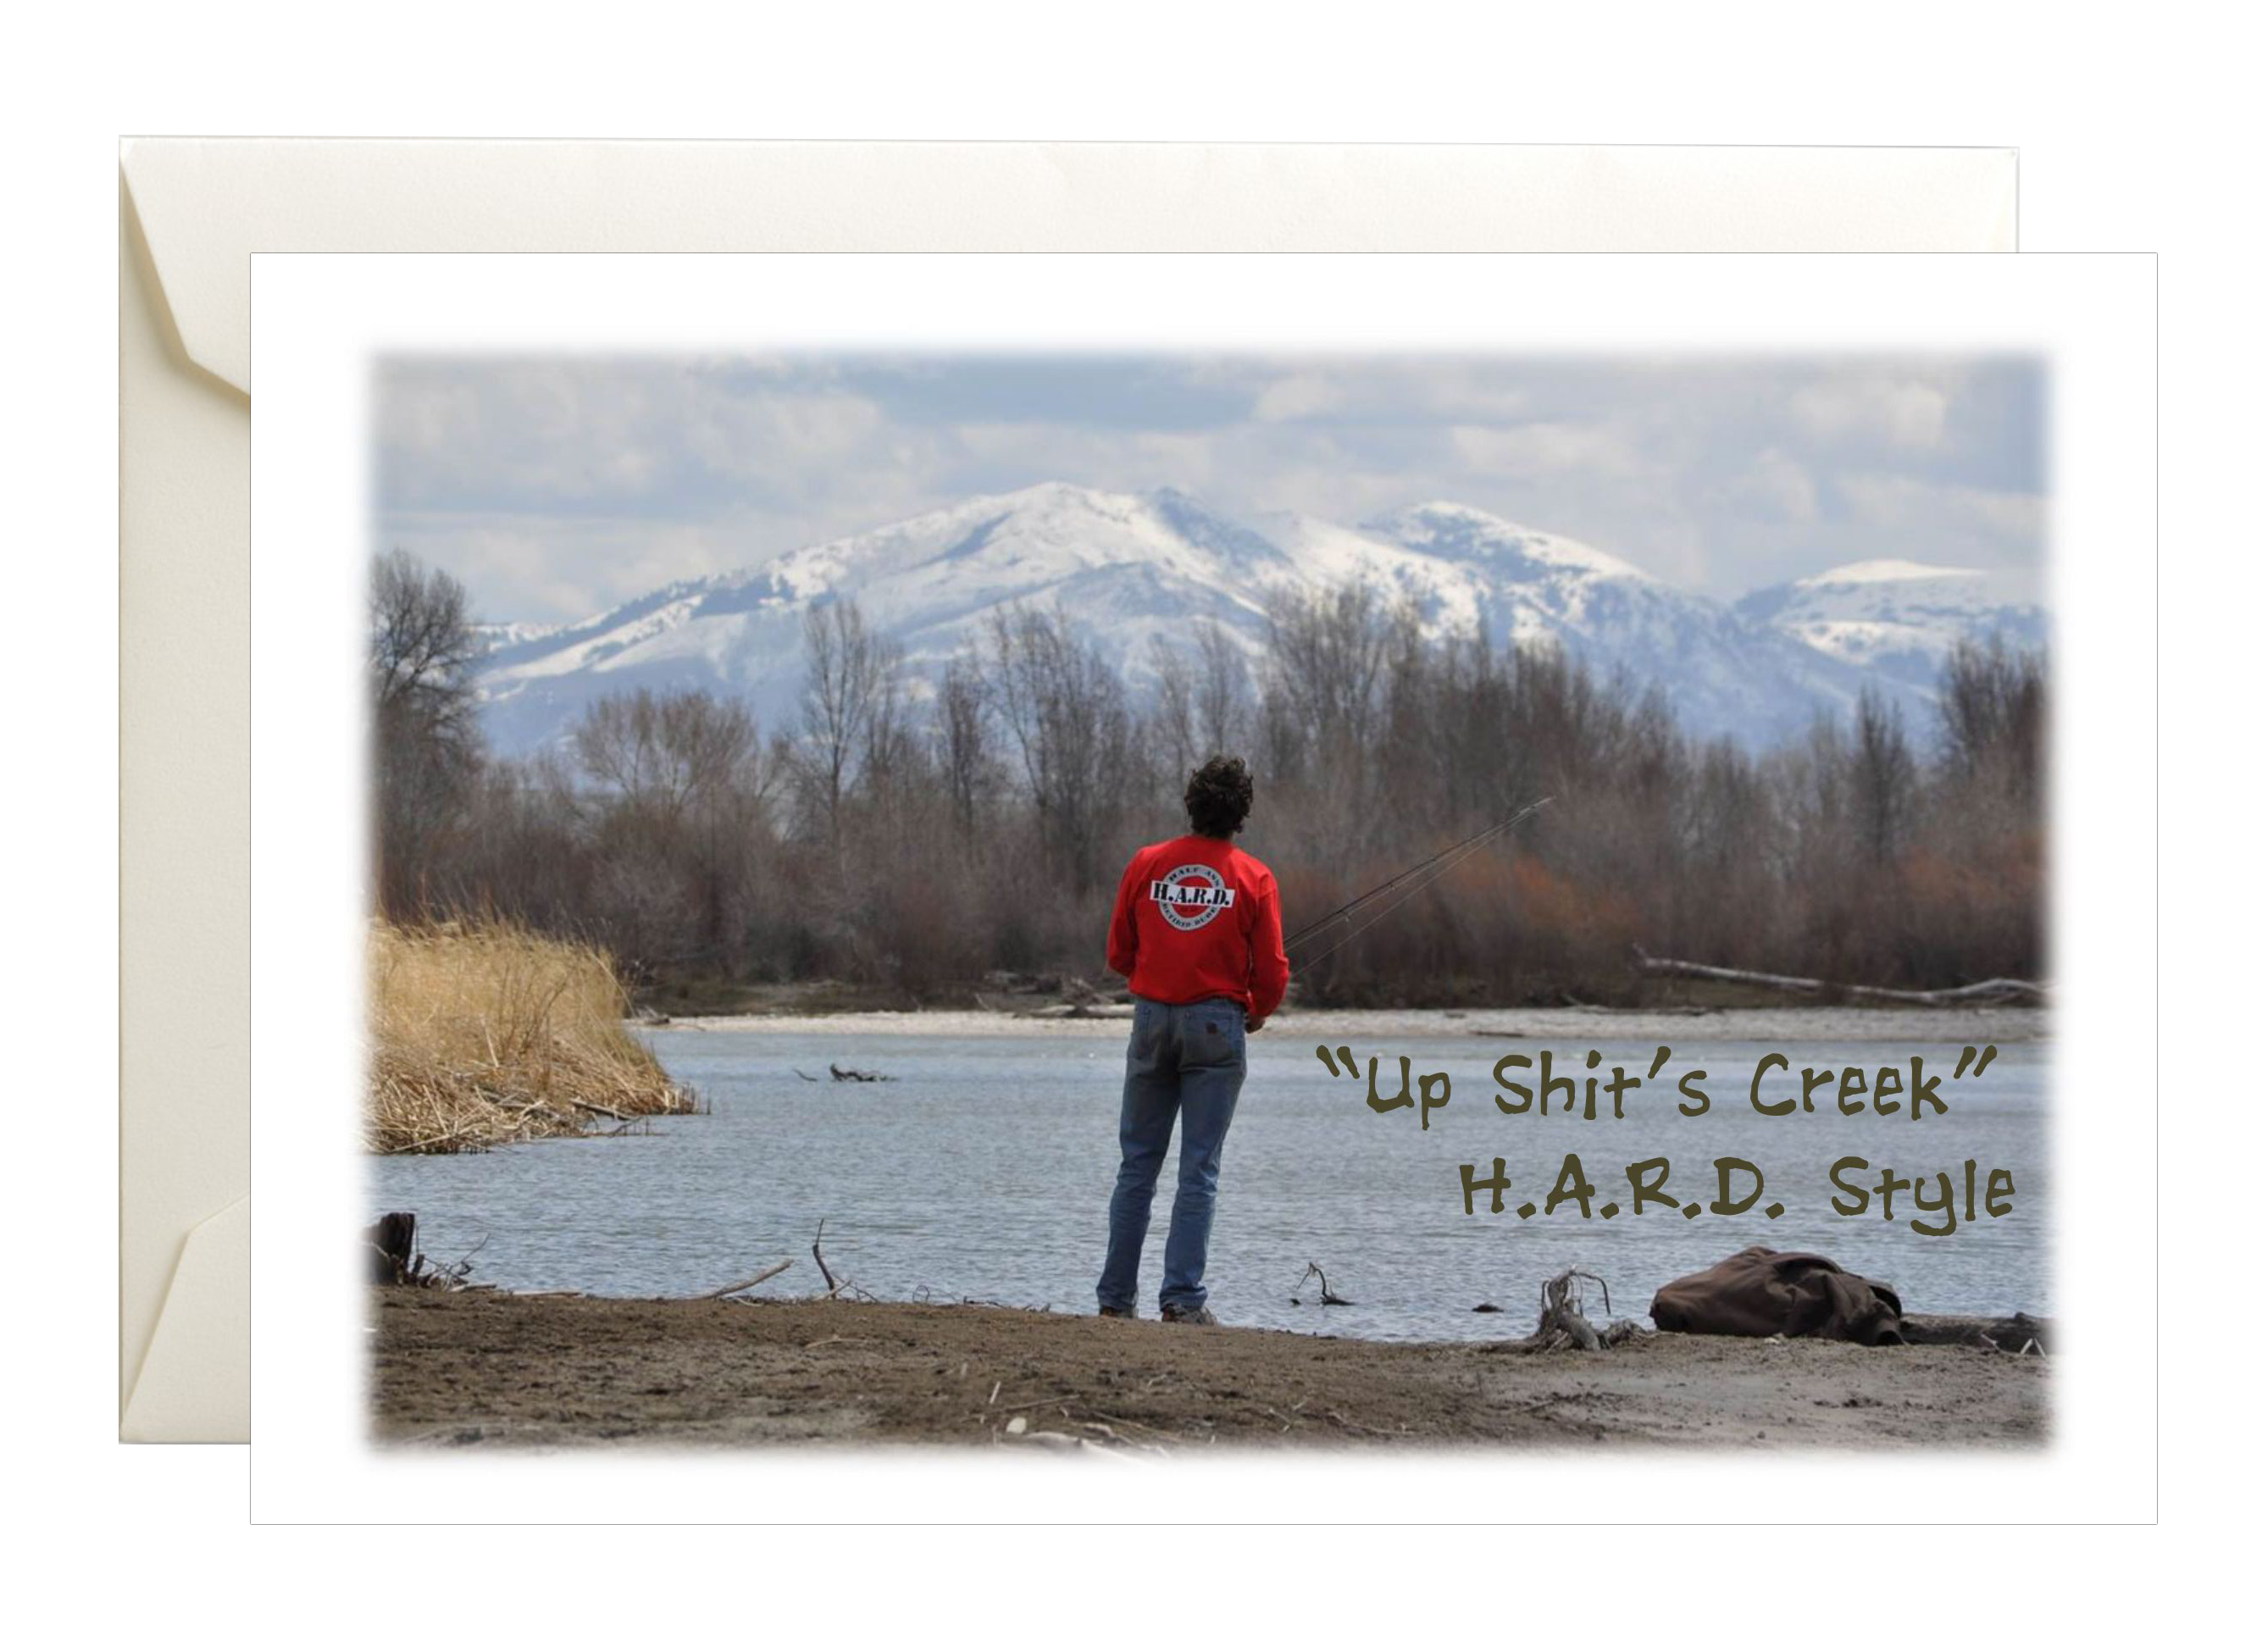 Image of guy fishing on a river wearing a HARD shirt with mountains in the back